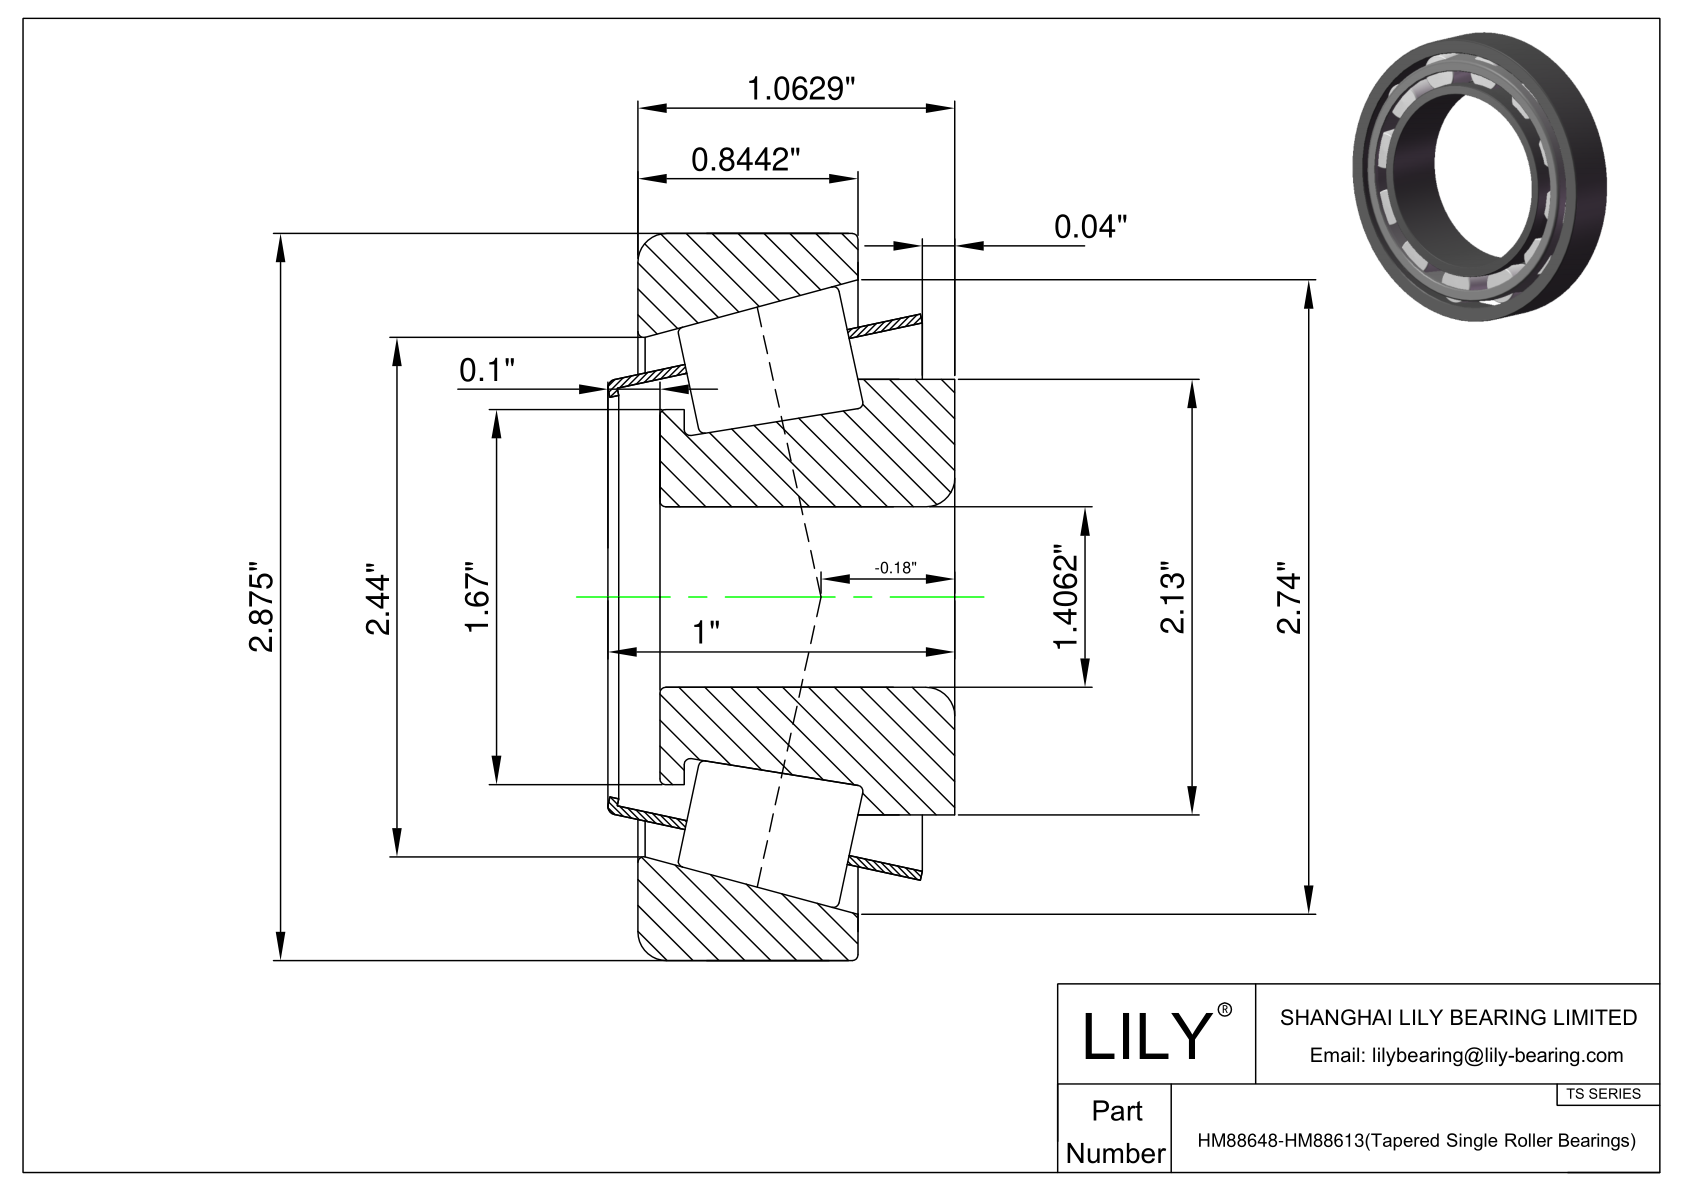 HM88648-HM88613 TS (Tapered Single Roller Bearings) (Imperial) cad drawing